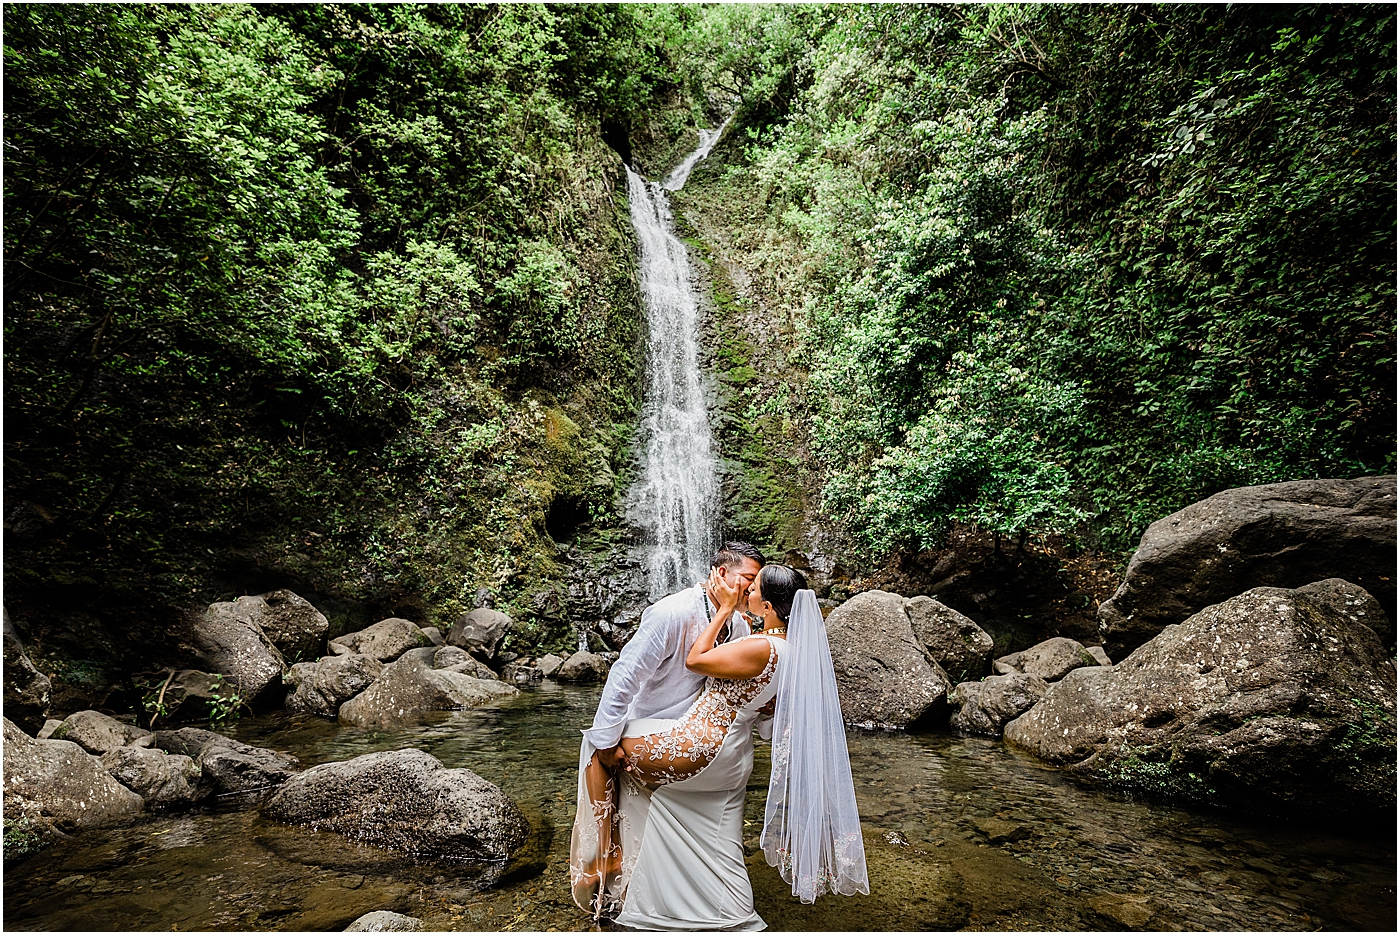 couple at waterfall with tips of how to become an adventure photographer